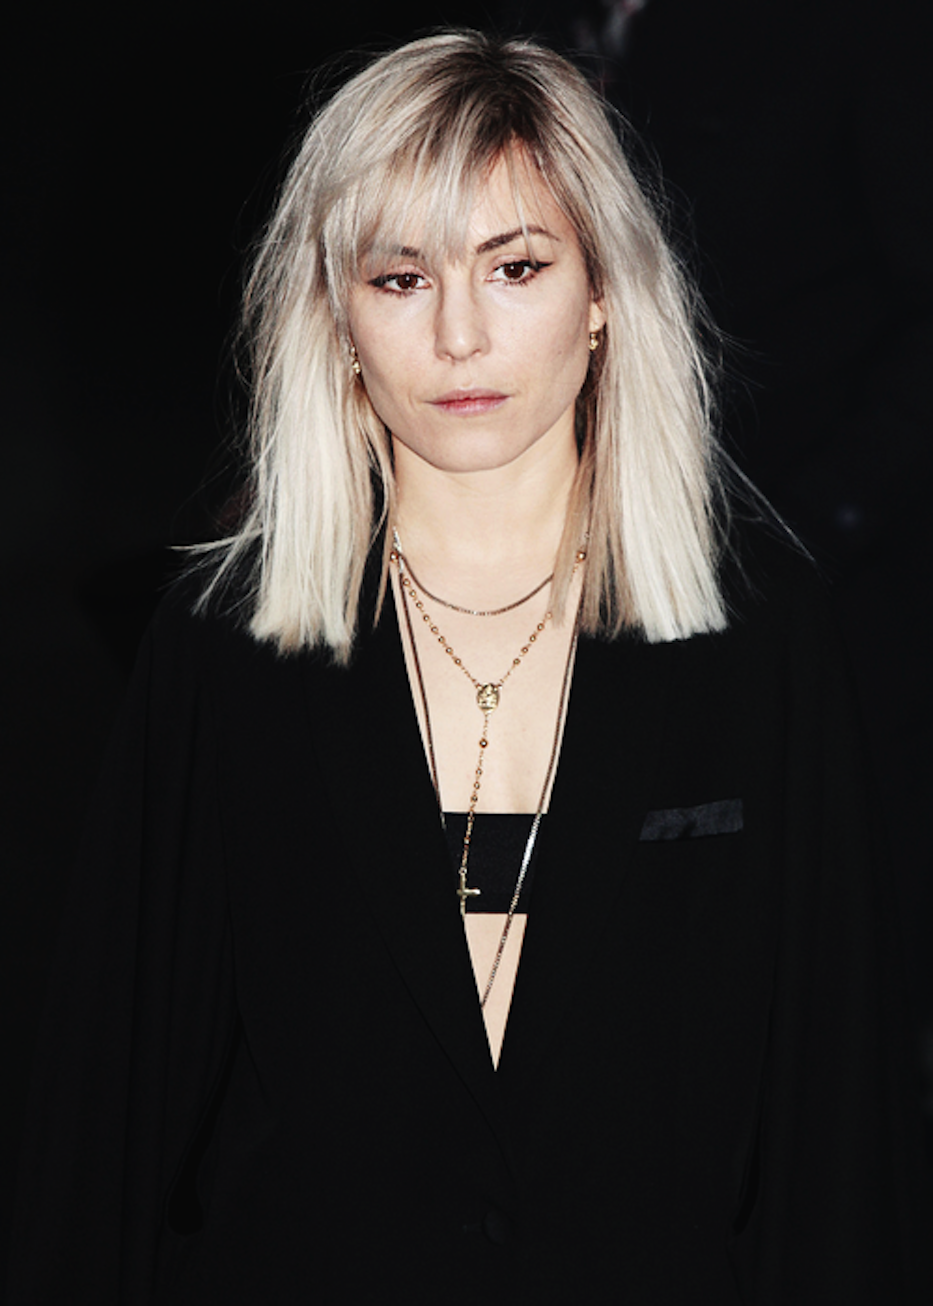 Noomi Rapace #22